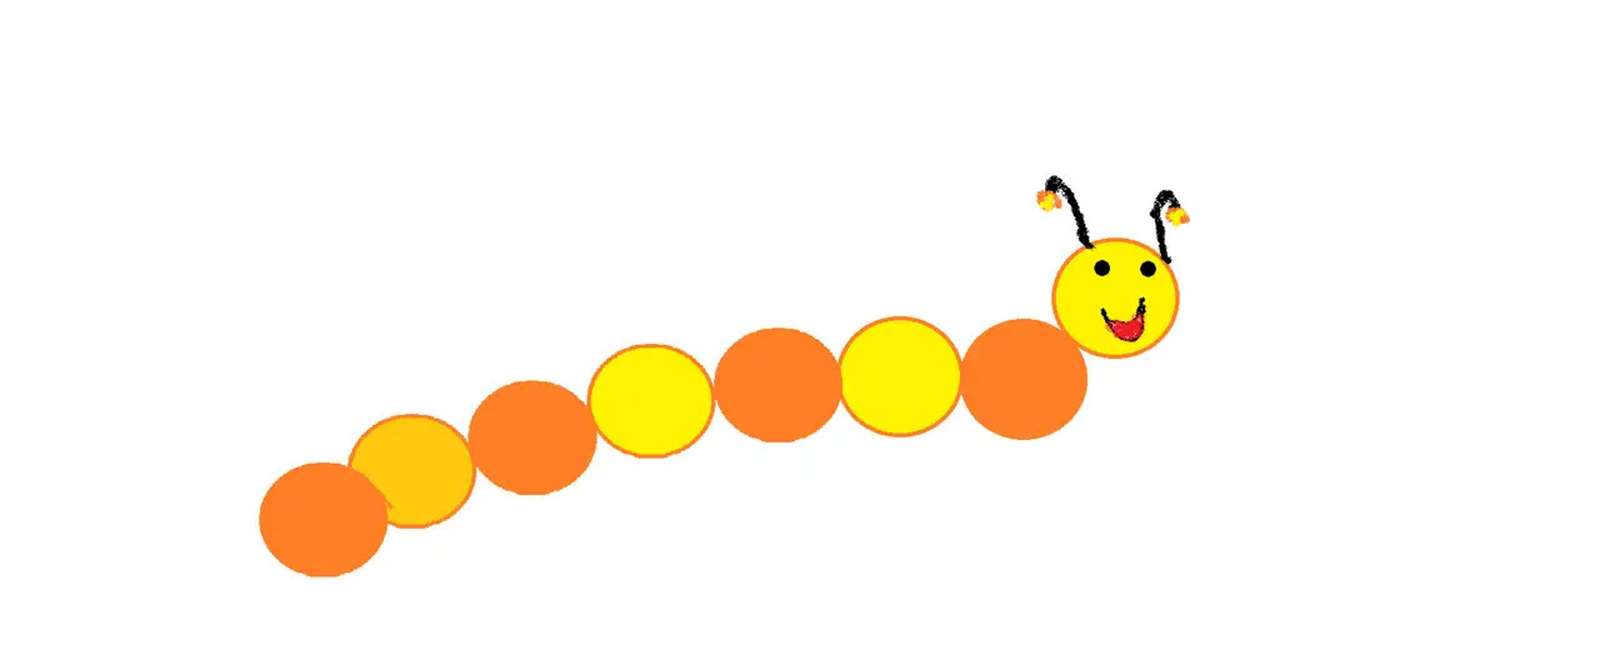 Caterpillar Image puzzle online from photo